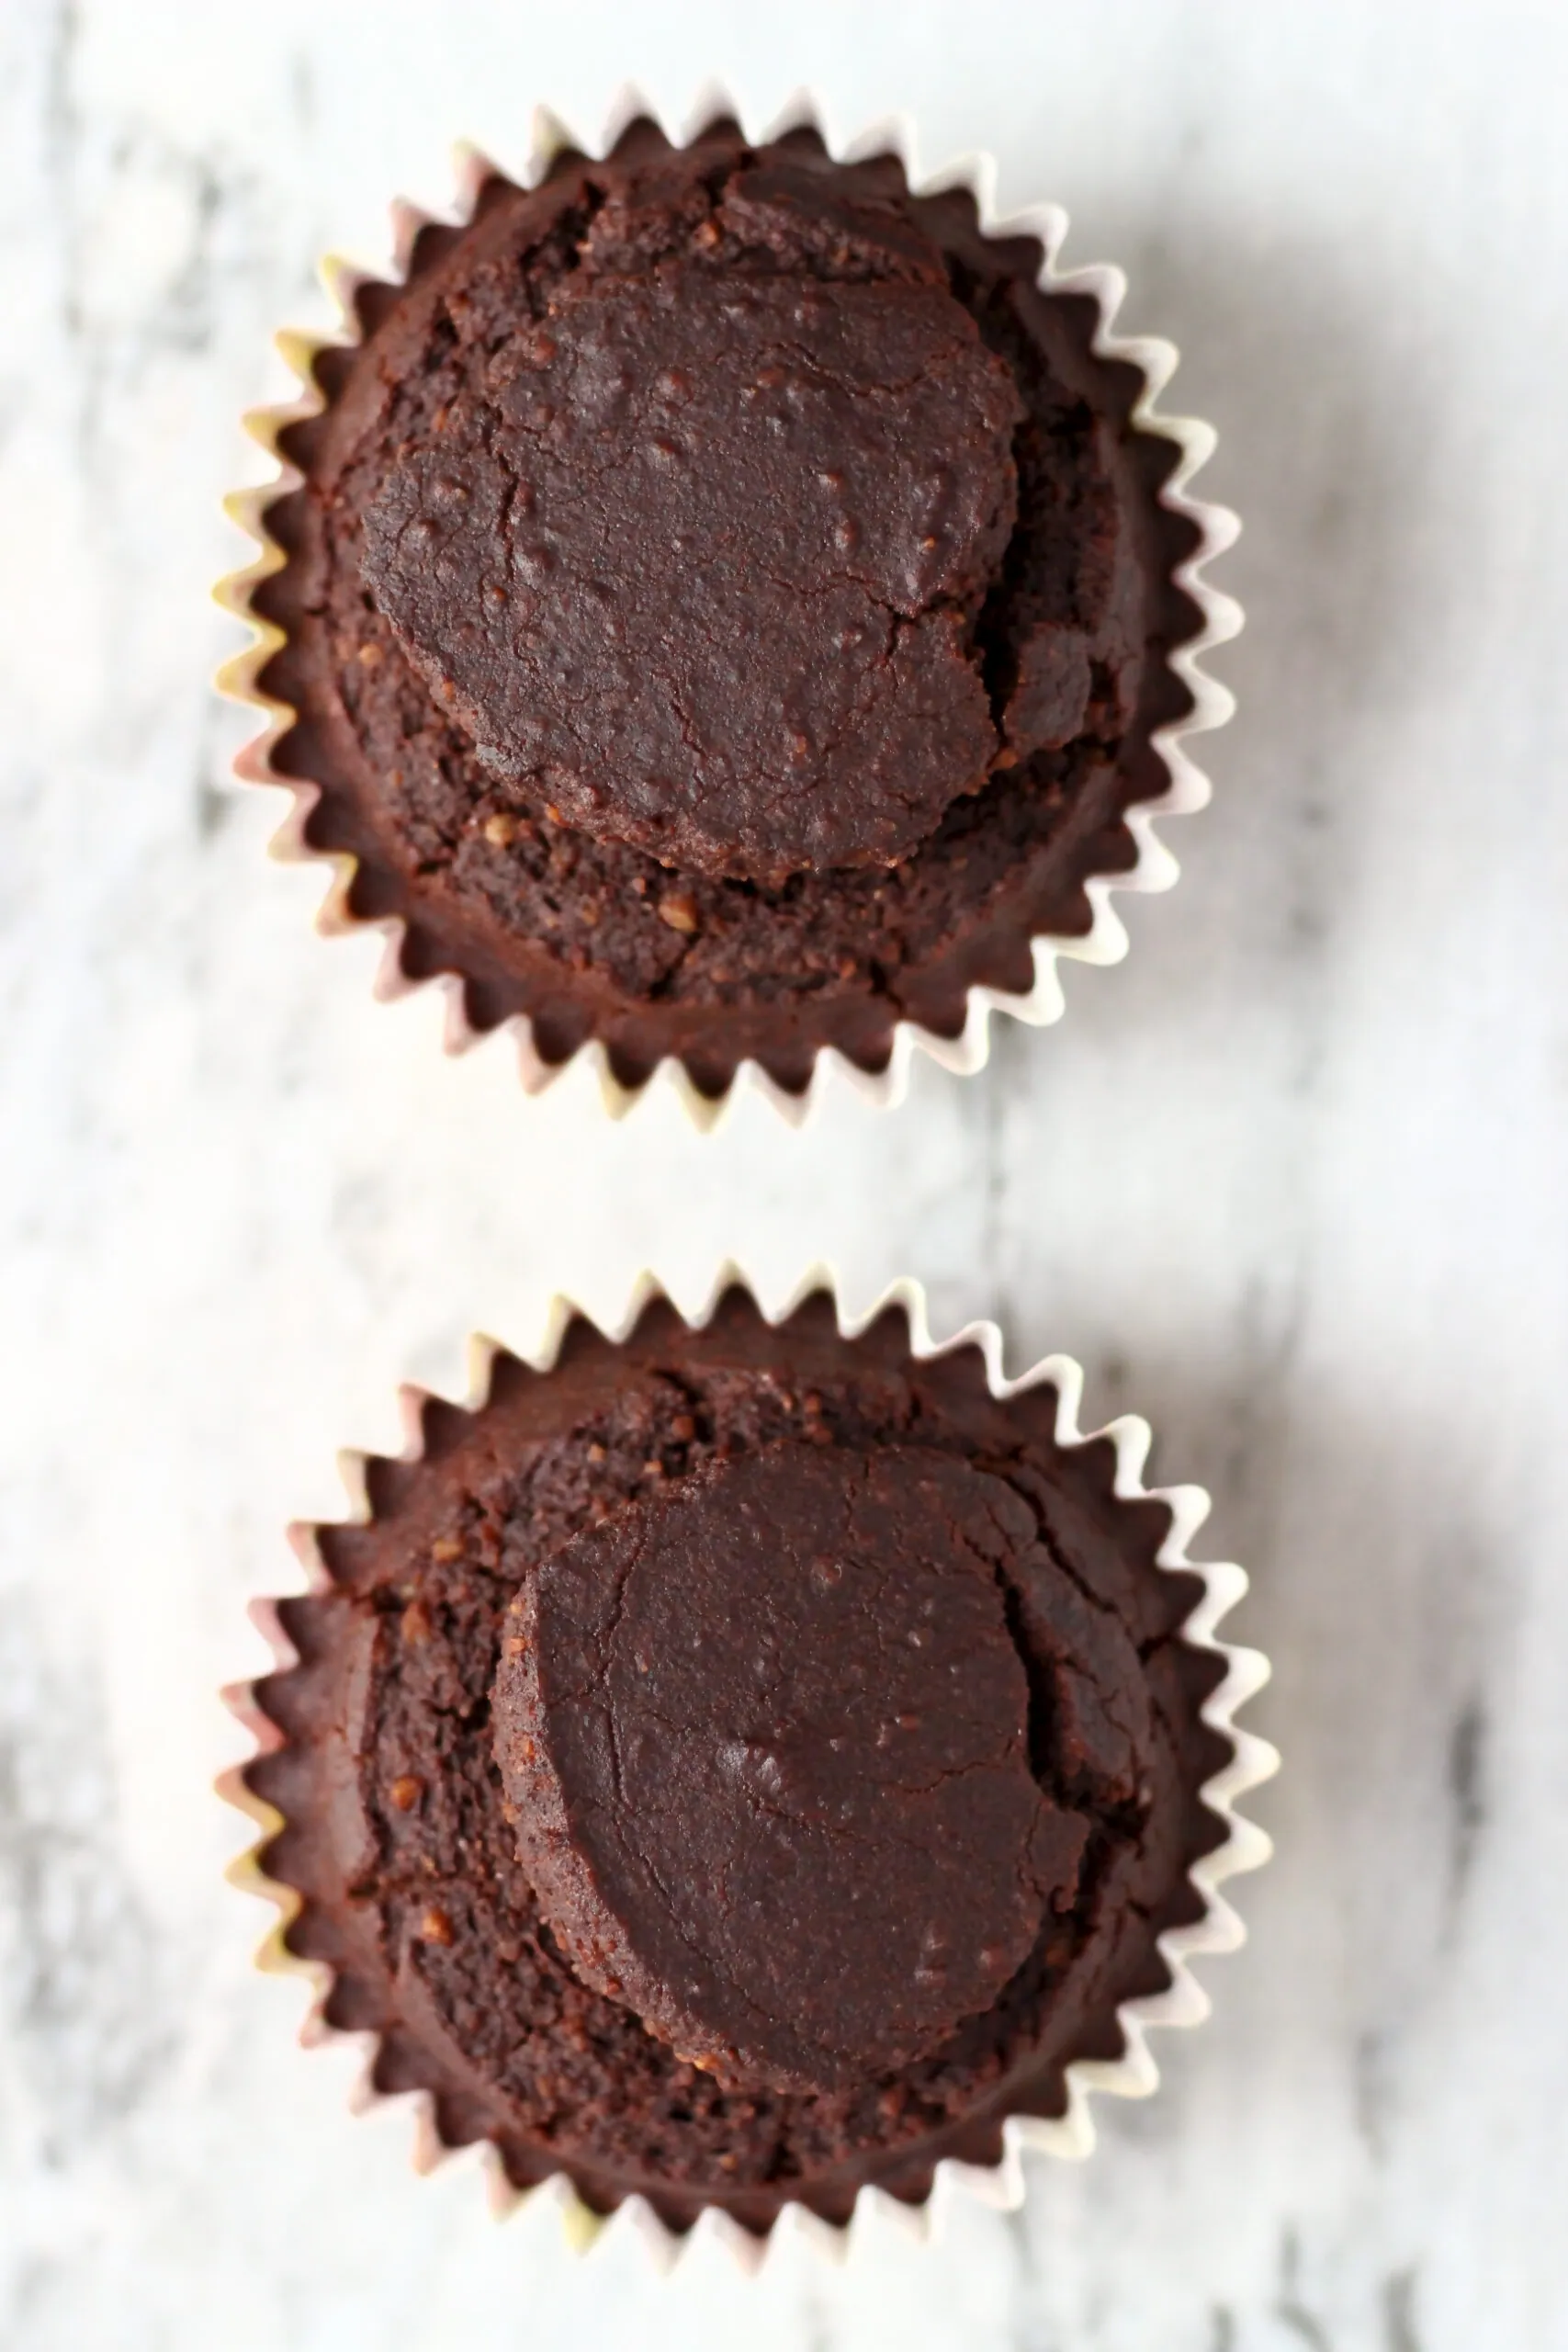 Two baked gluten-free vegan chocolate cupcakes in cupcake cases